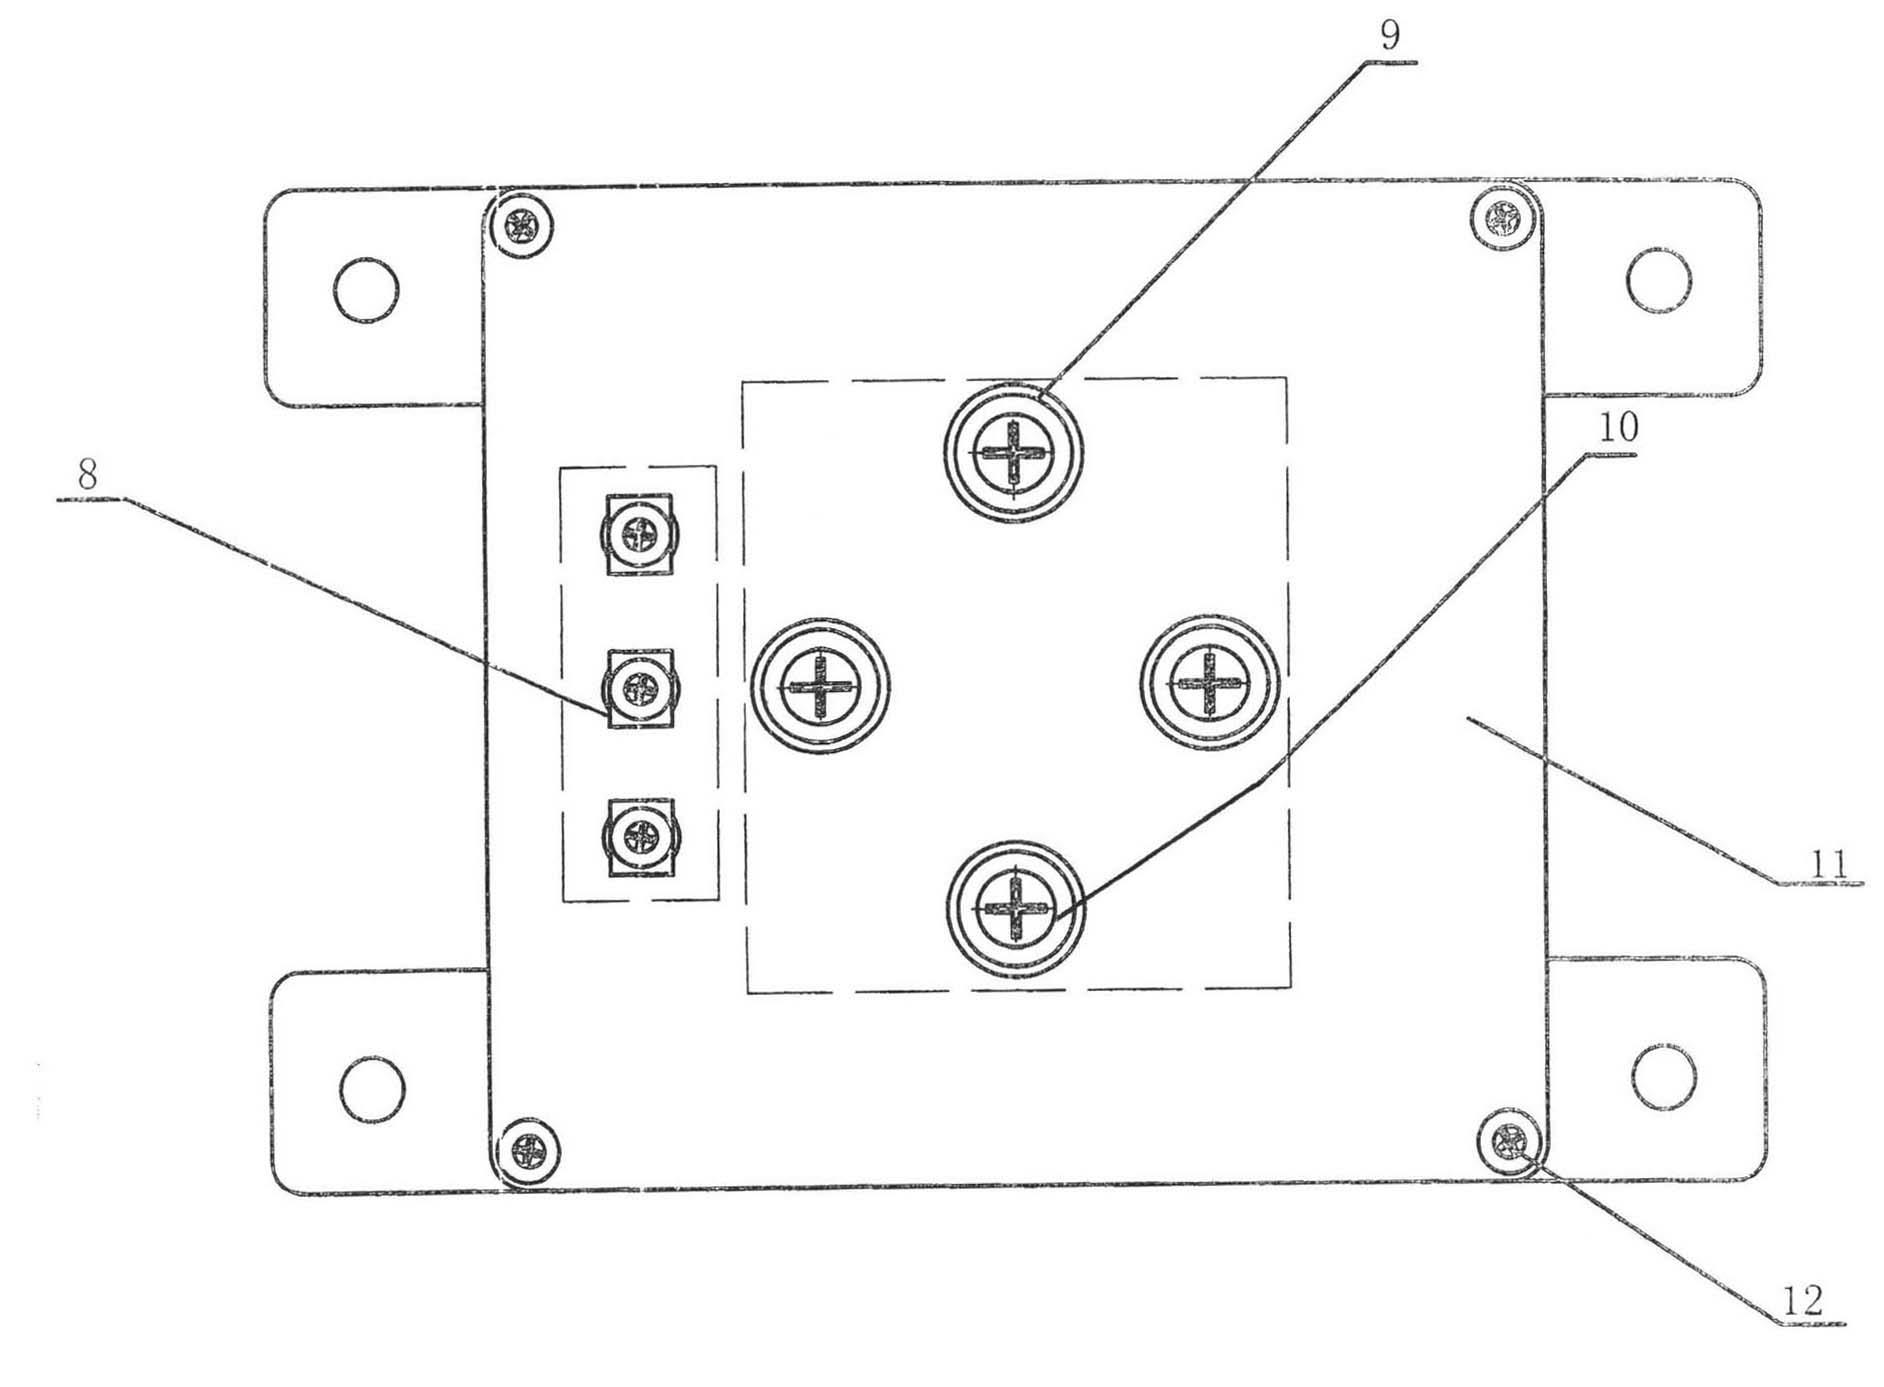 Steering controller of high-power direct-current motor